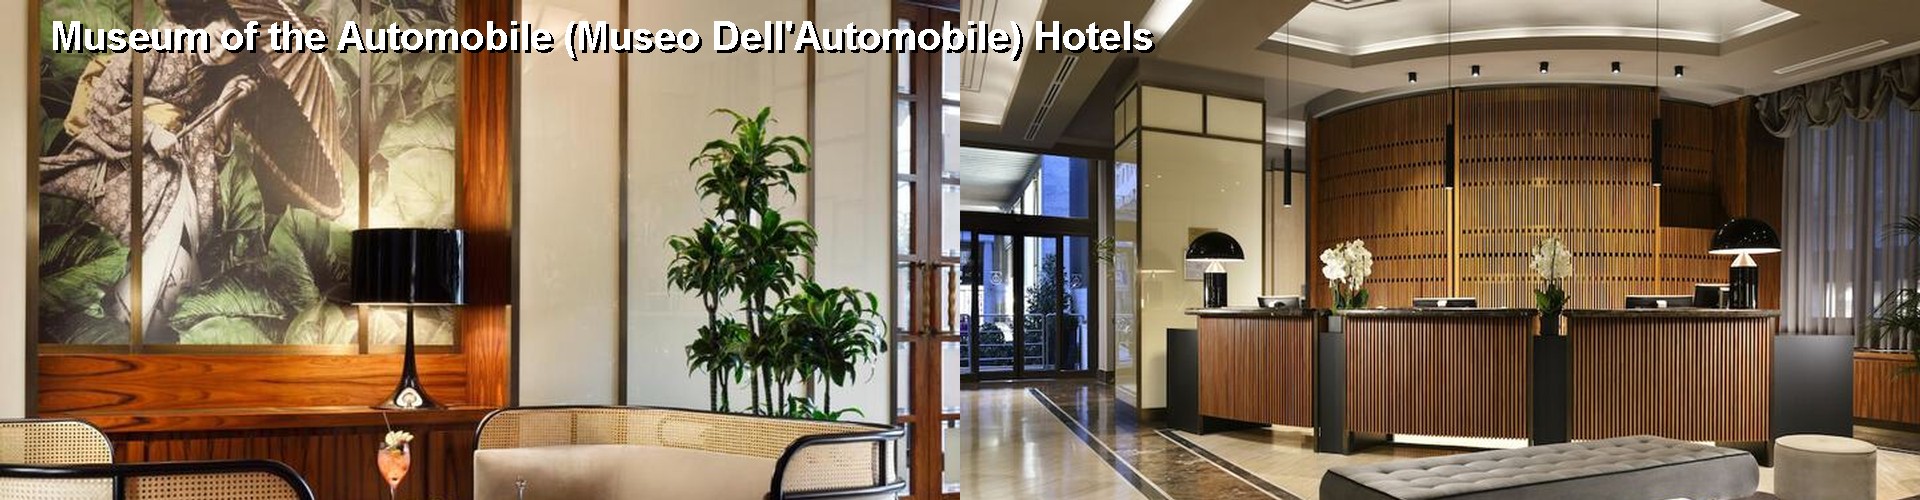 5 Best Hotels near Museum of the Automobile (Museo Dell'Automobile)